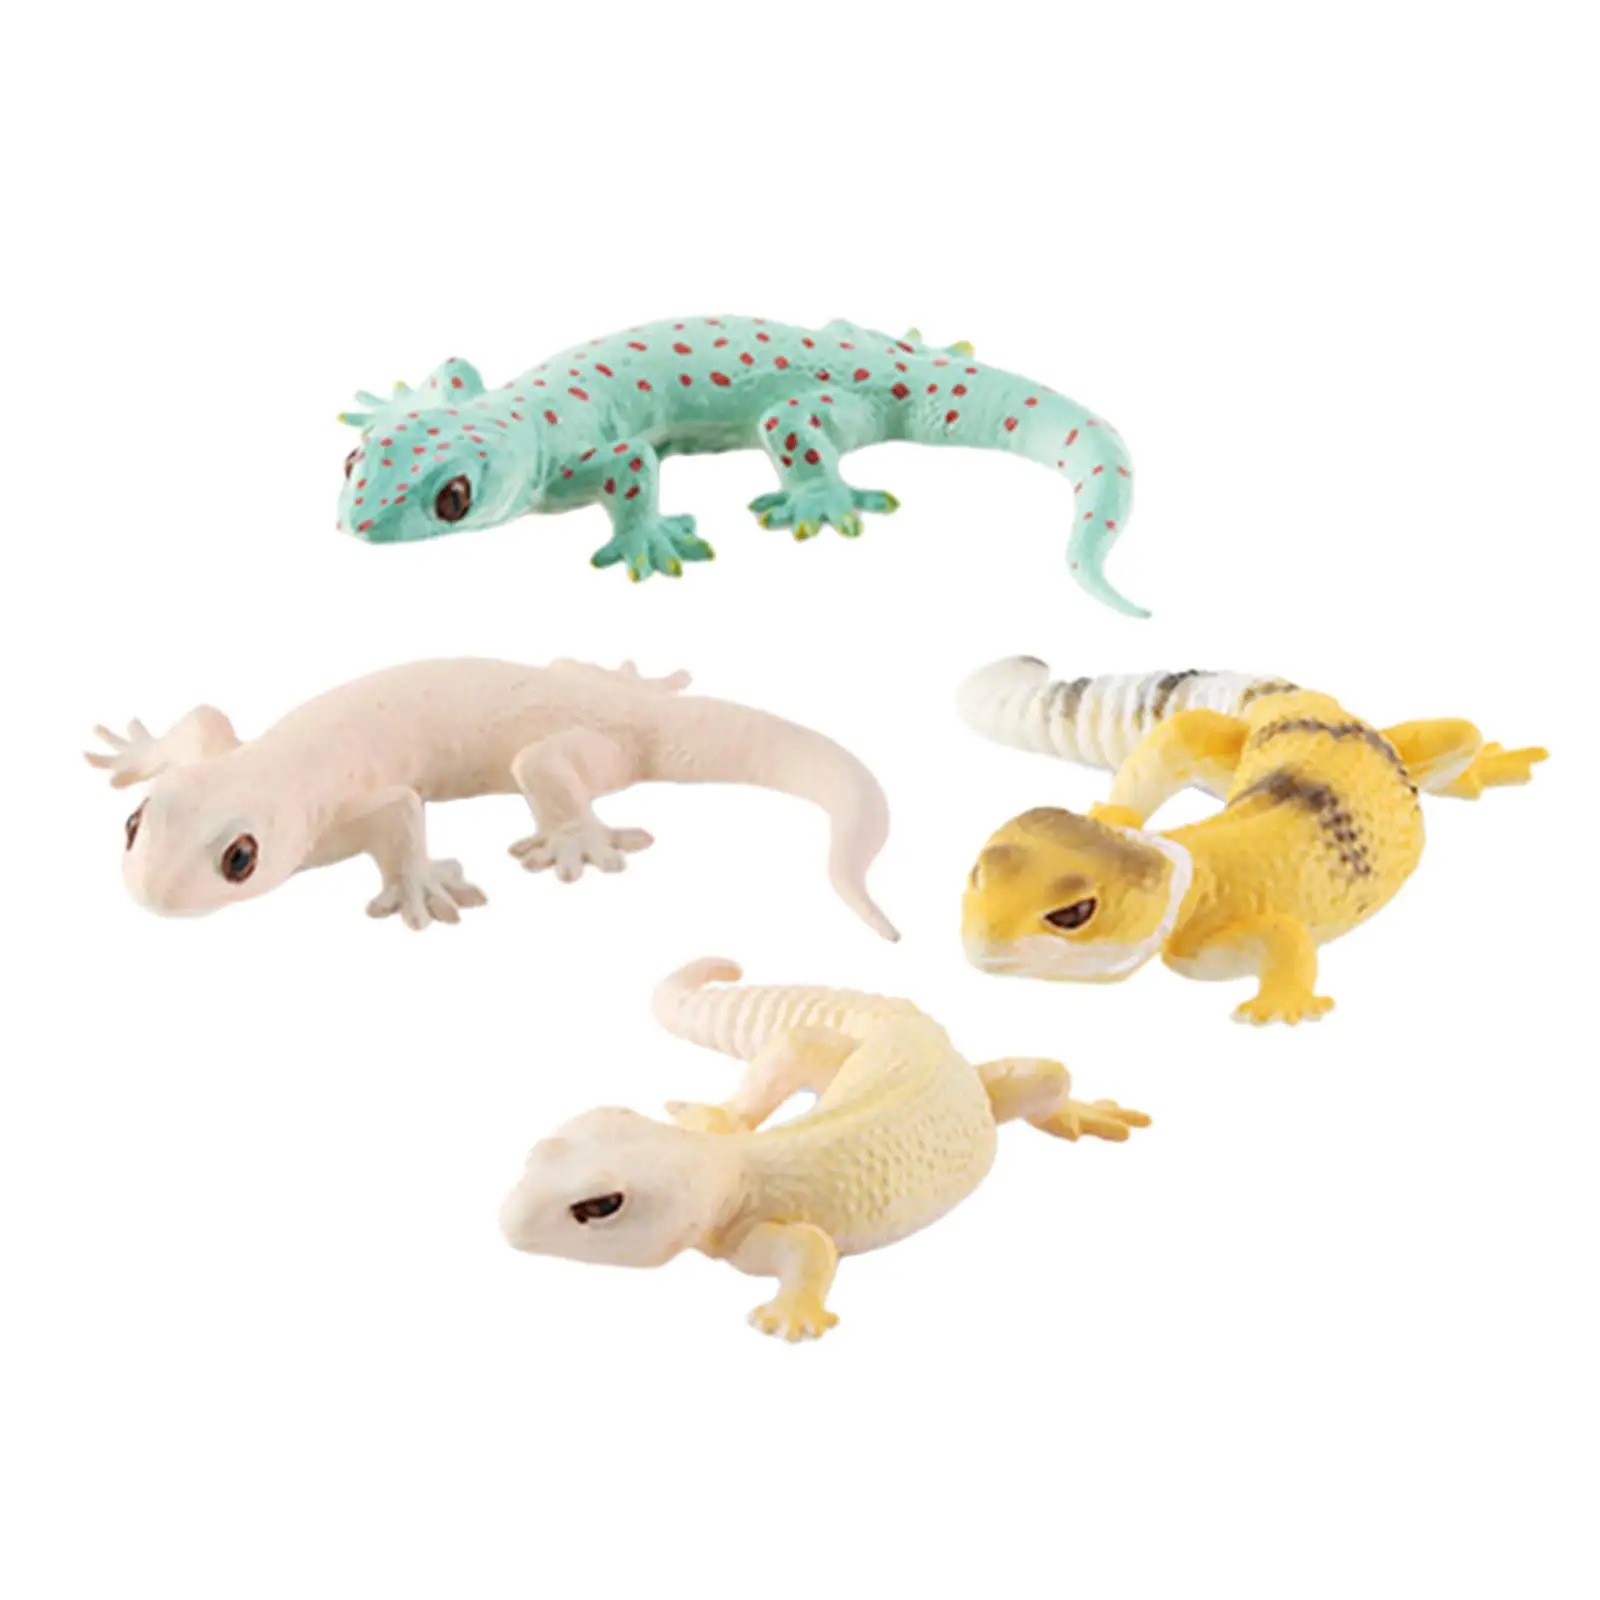 4Pcs Lizards Models Collectible Educational Toy Animal Figures for DIY Projects Fairy Garden